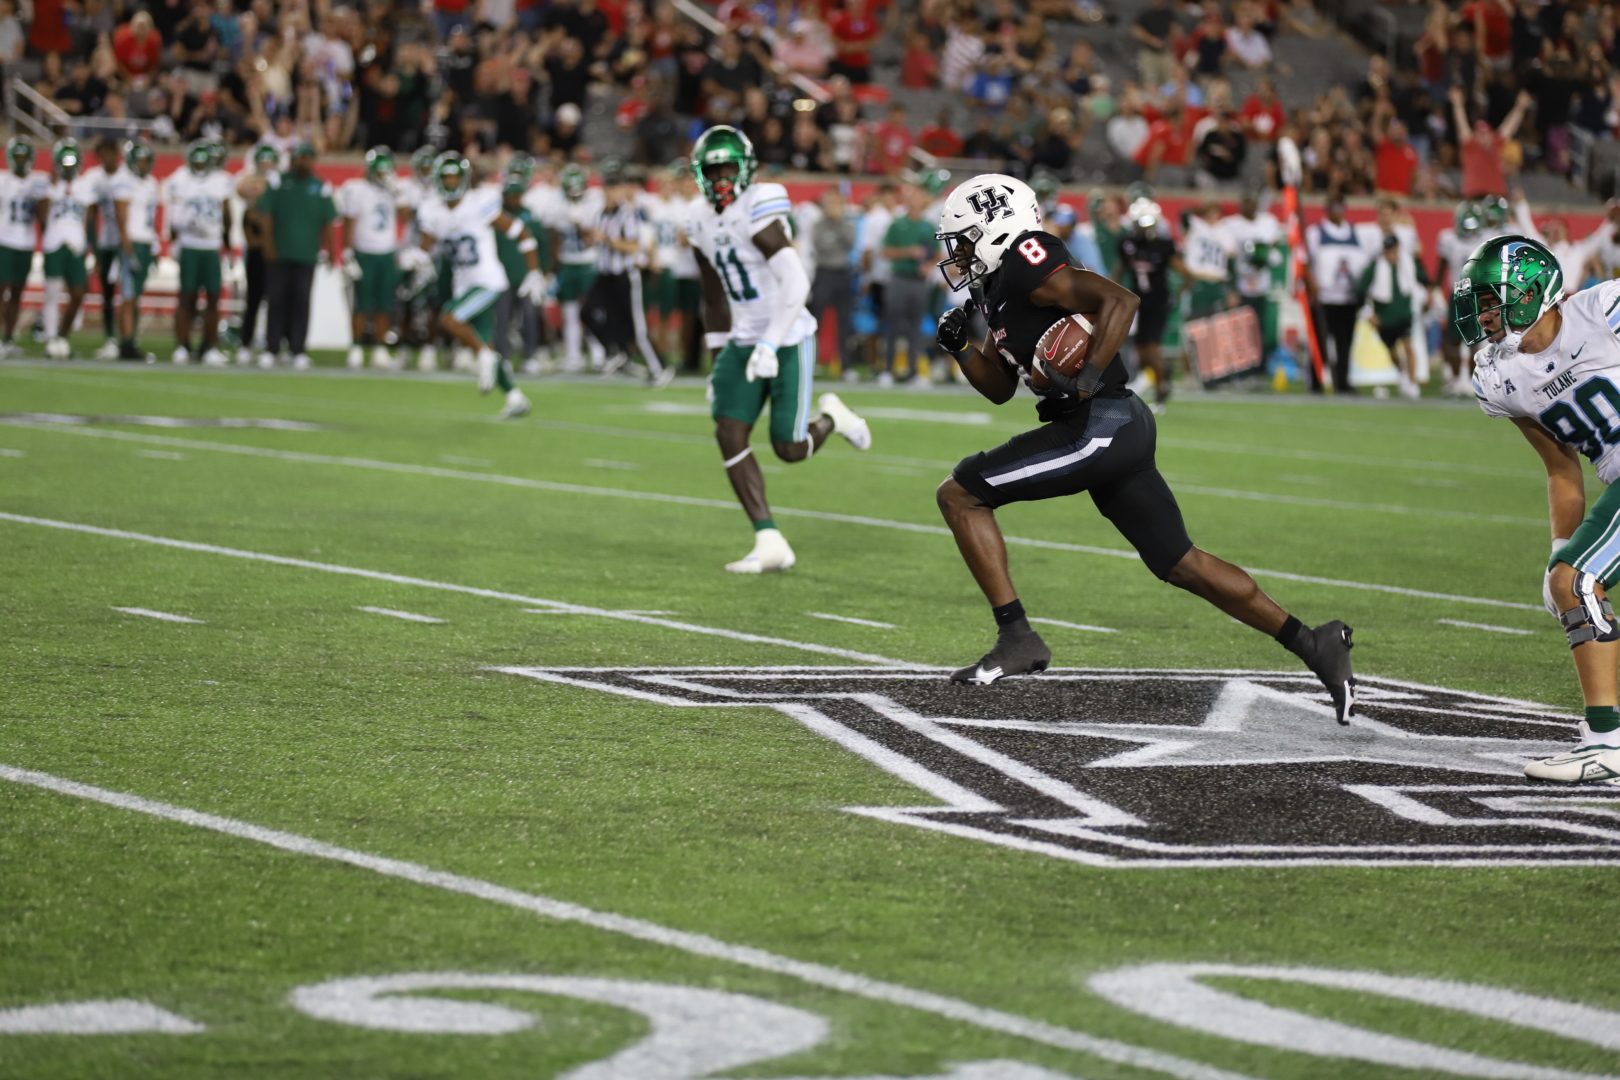 UH football senior receiver KeSean Carter has a 133 yards and two touchdowns through the halfway point of the 2022 season. | James Mueller/The Cougar